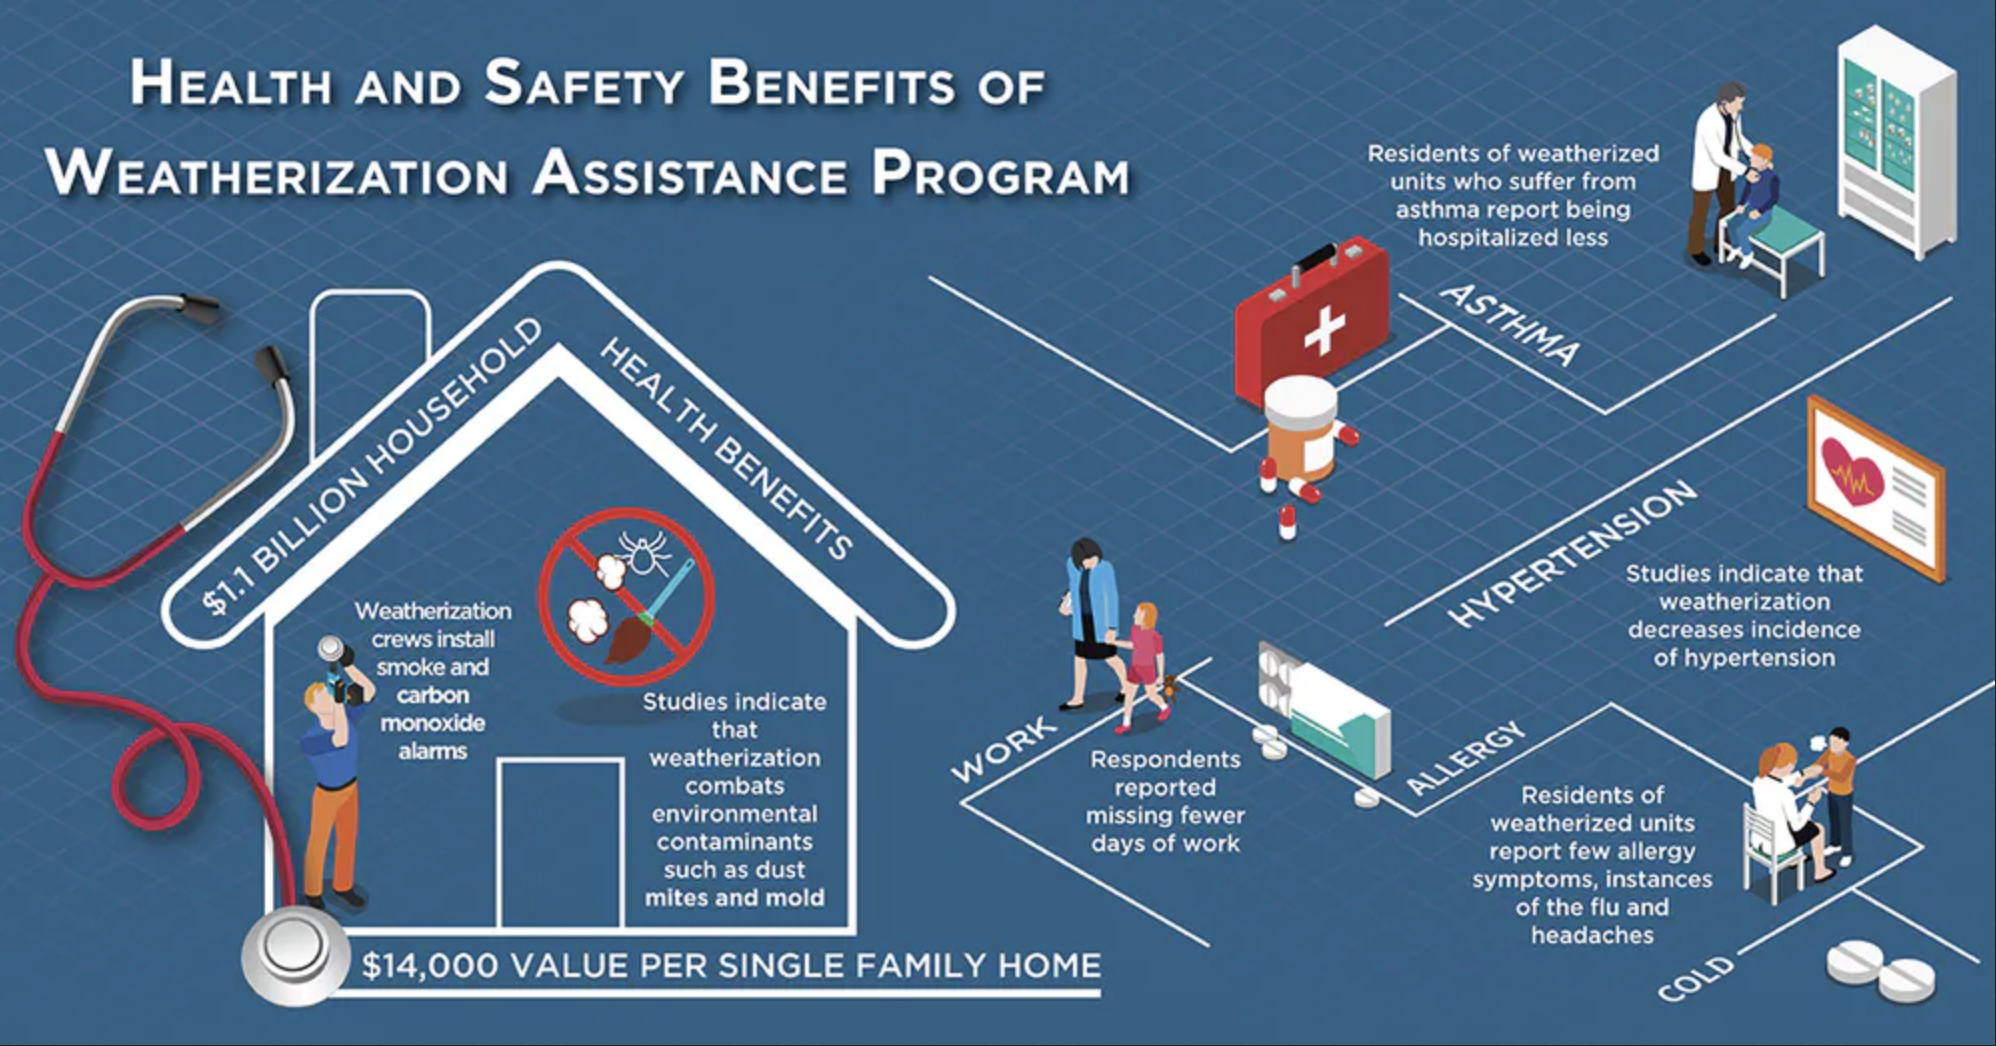 Weatherization is mainly about energy benefits, but can yield other household health and non-energy benefits. Graphic by Sarah Harman / Department of Energy.